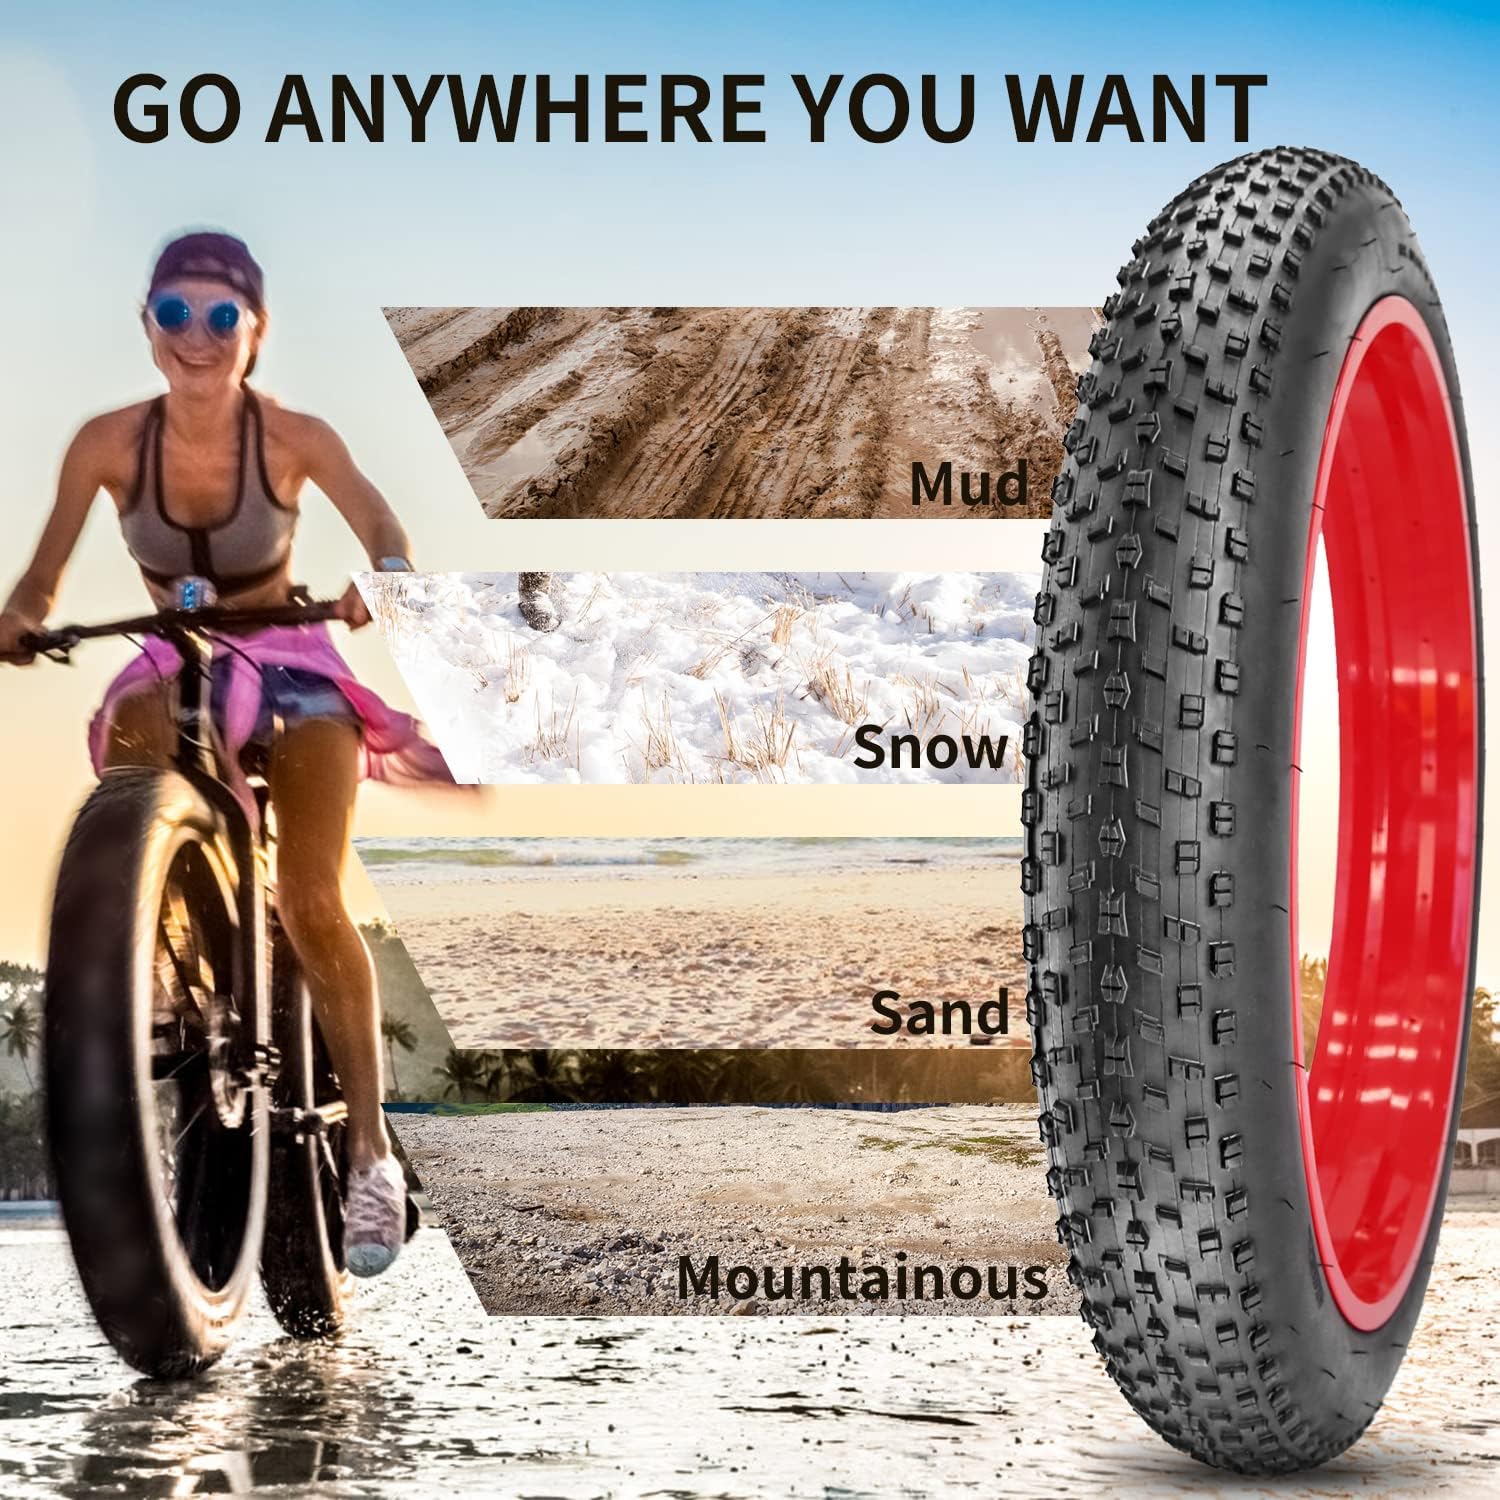 Hycline 2-Pack Fat Bike Tires 20×4.0/26×4.0 For E-bike, Motorcycle 20x4.0 for any terrains